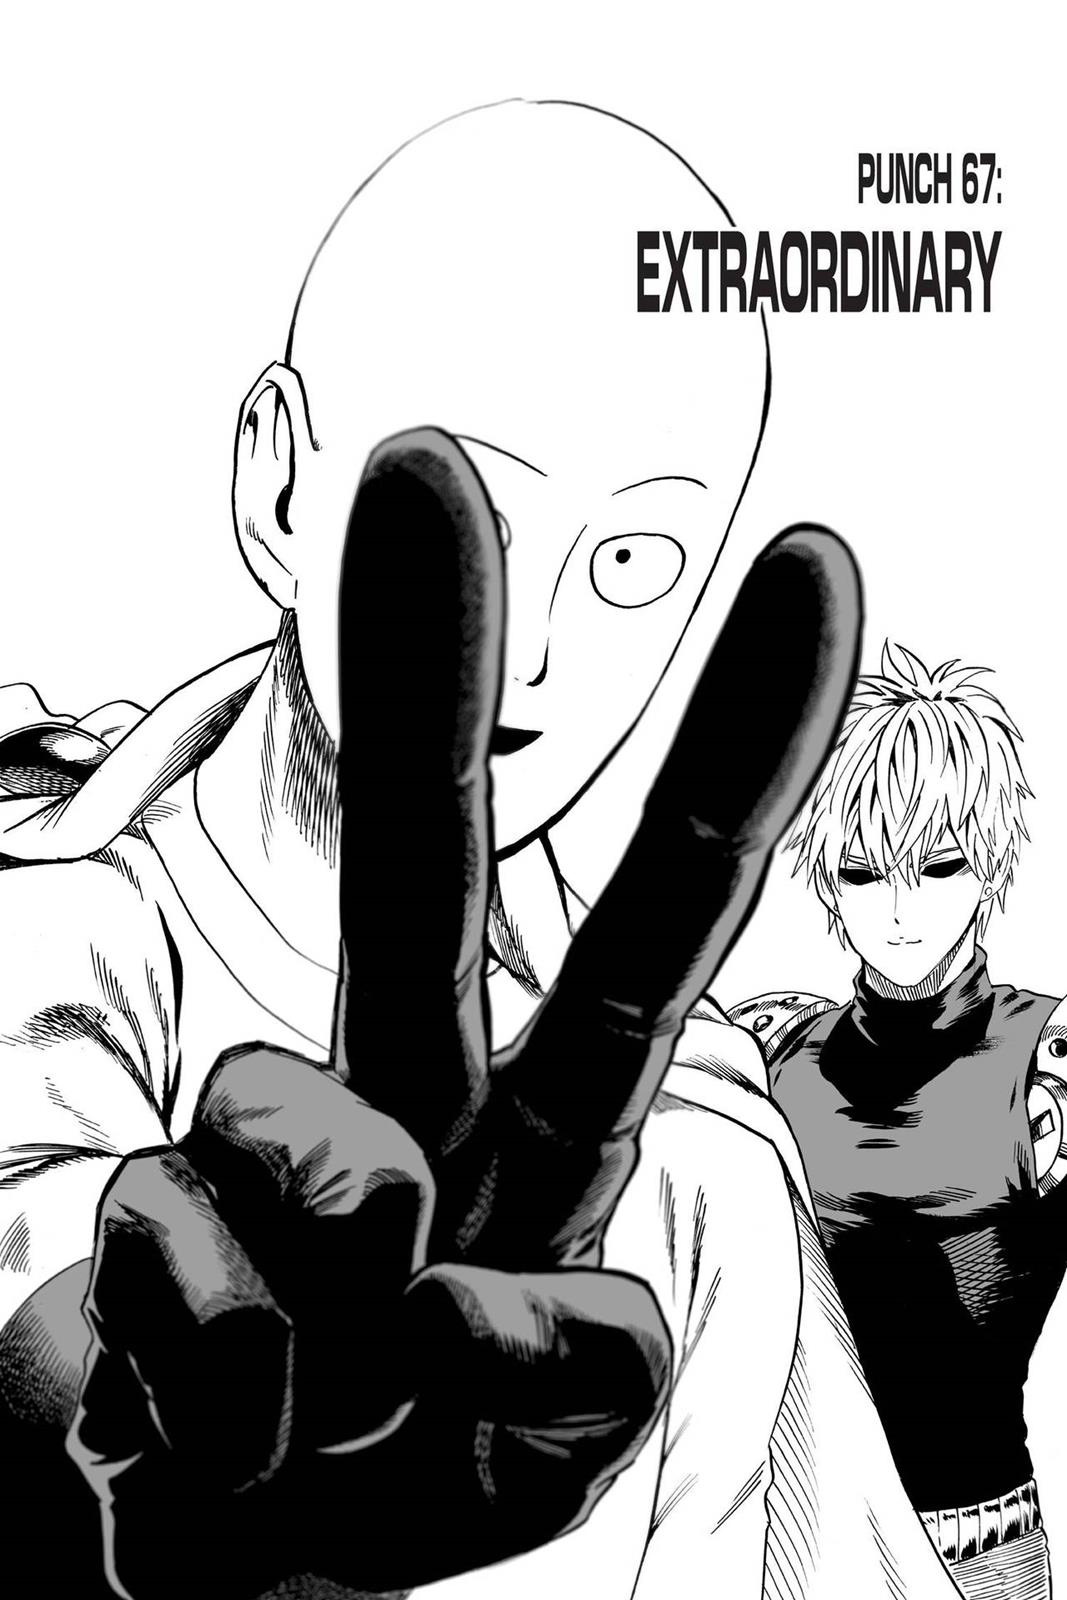 One-Punch Man, Punch 67 image 01